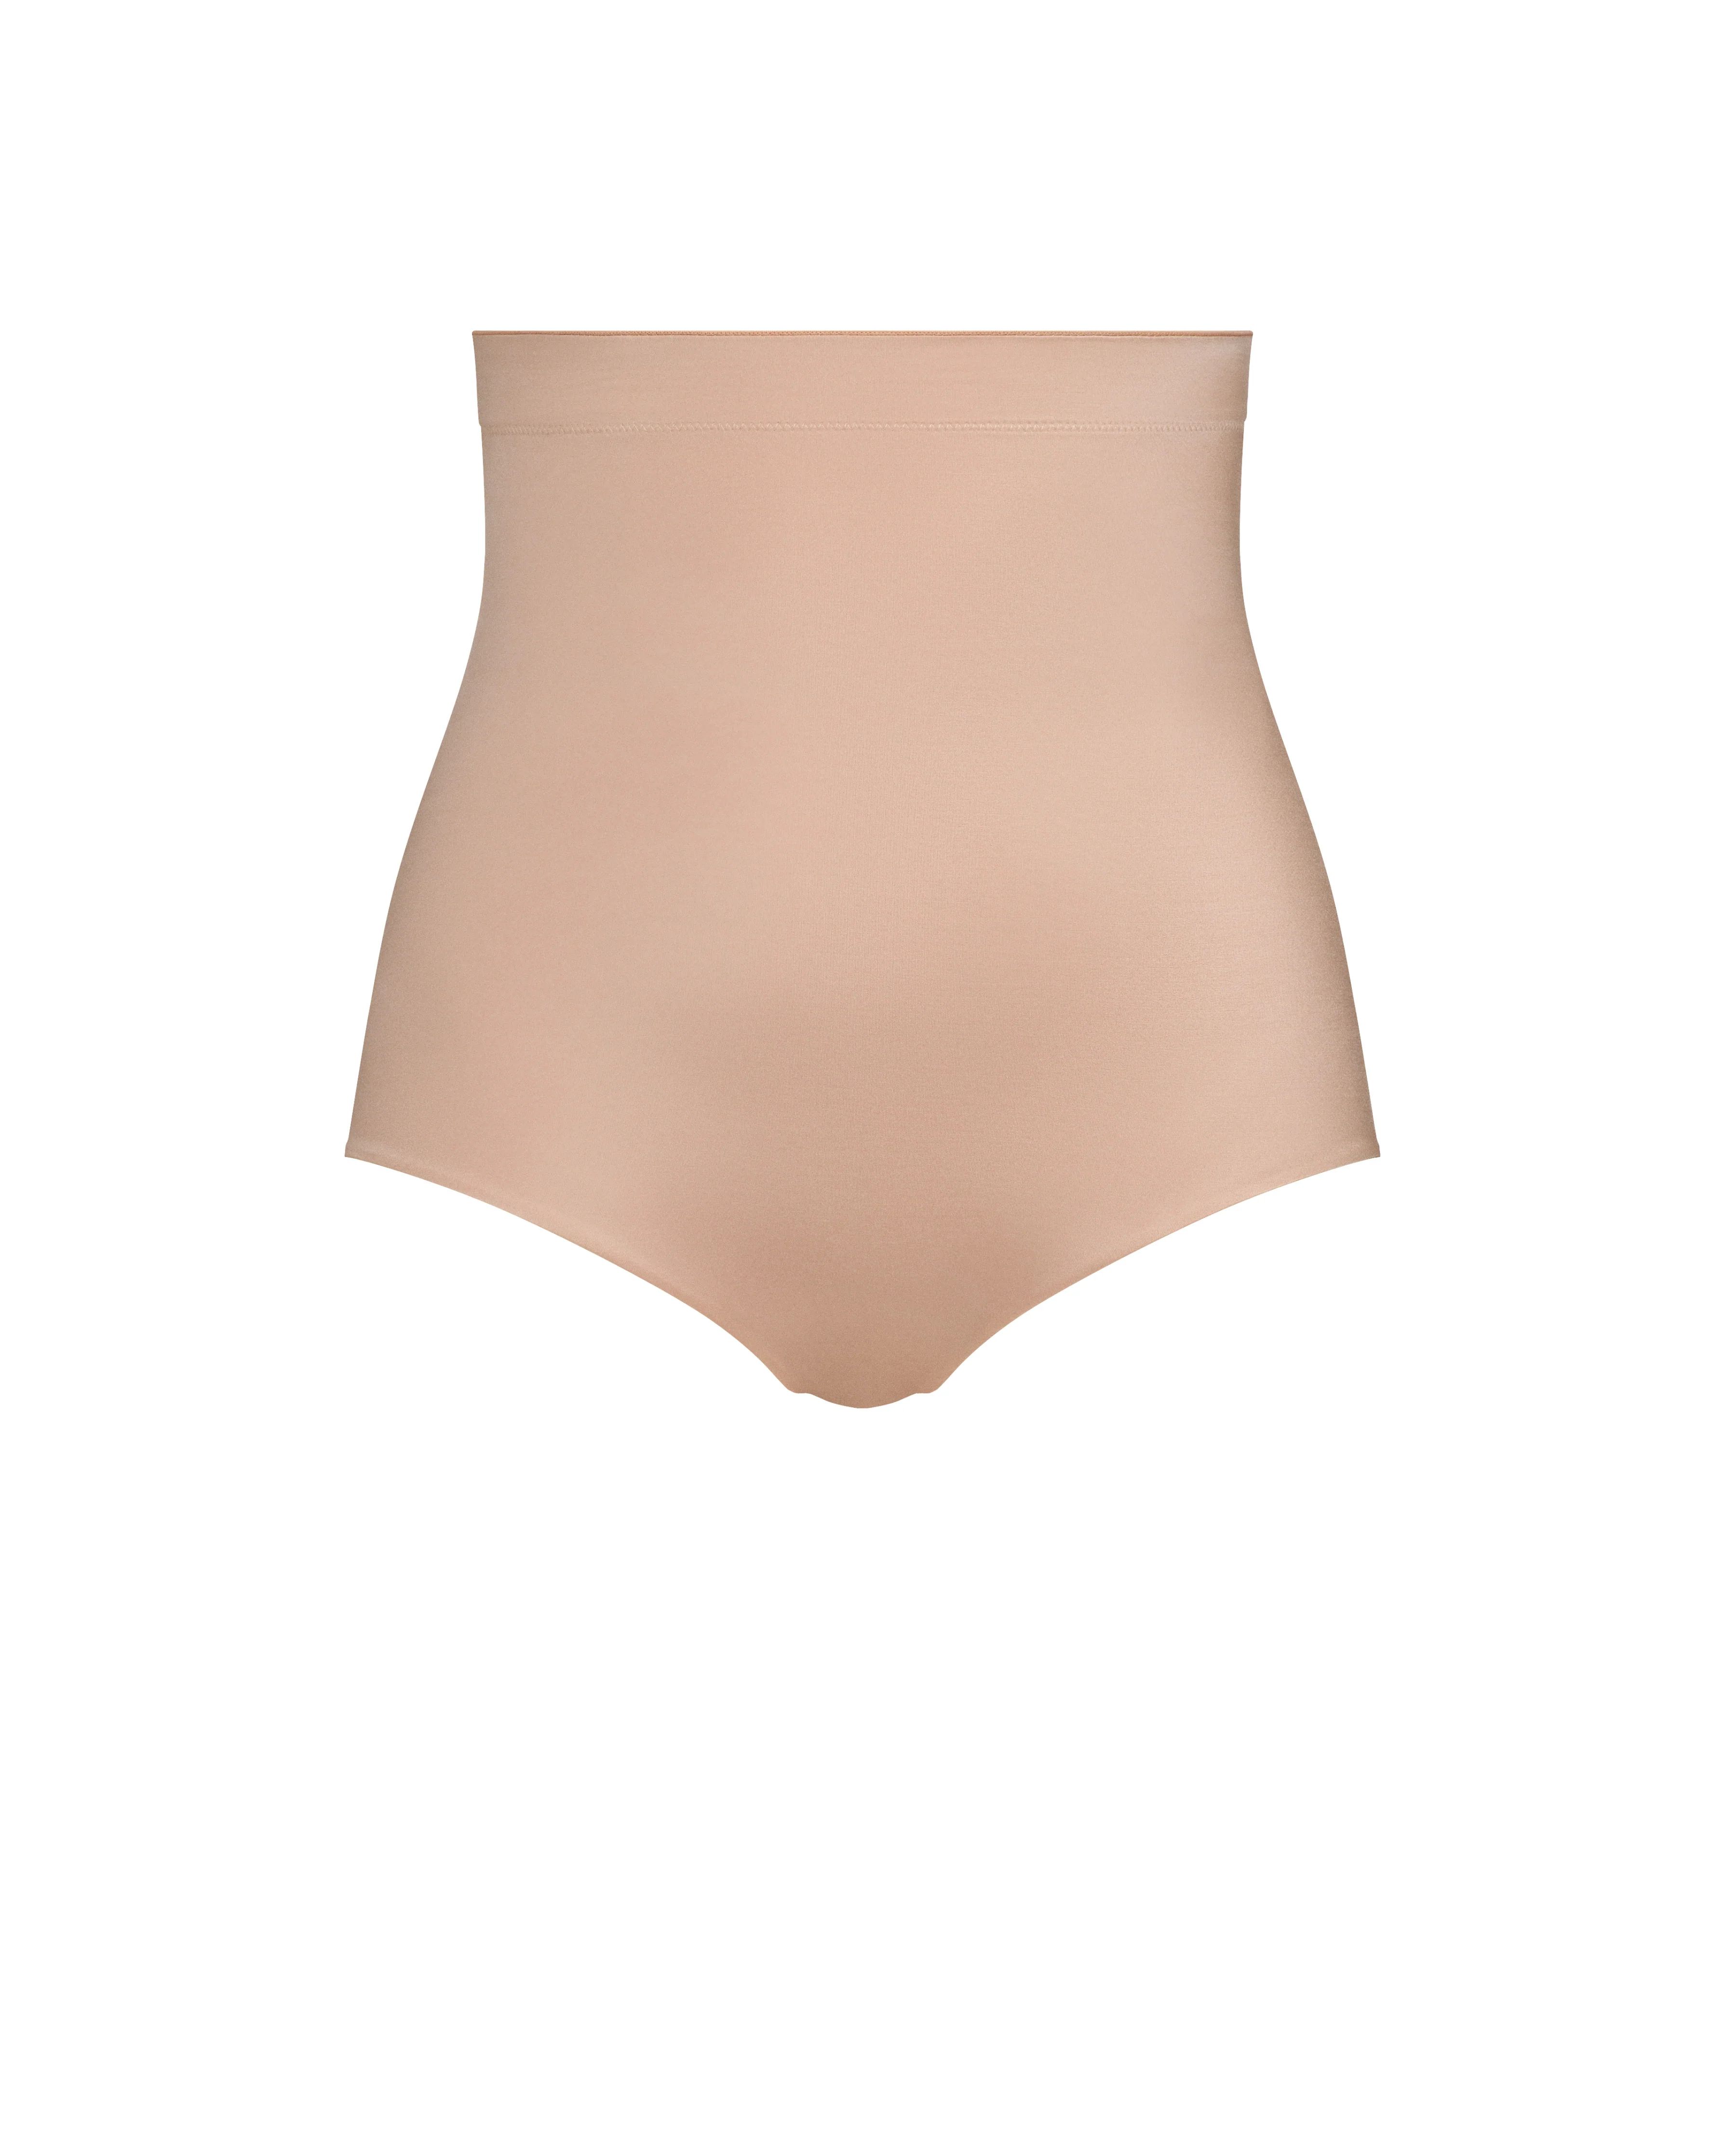 Suit Your Fancy High-Waisted Brief | Spanx